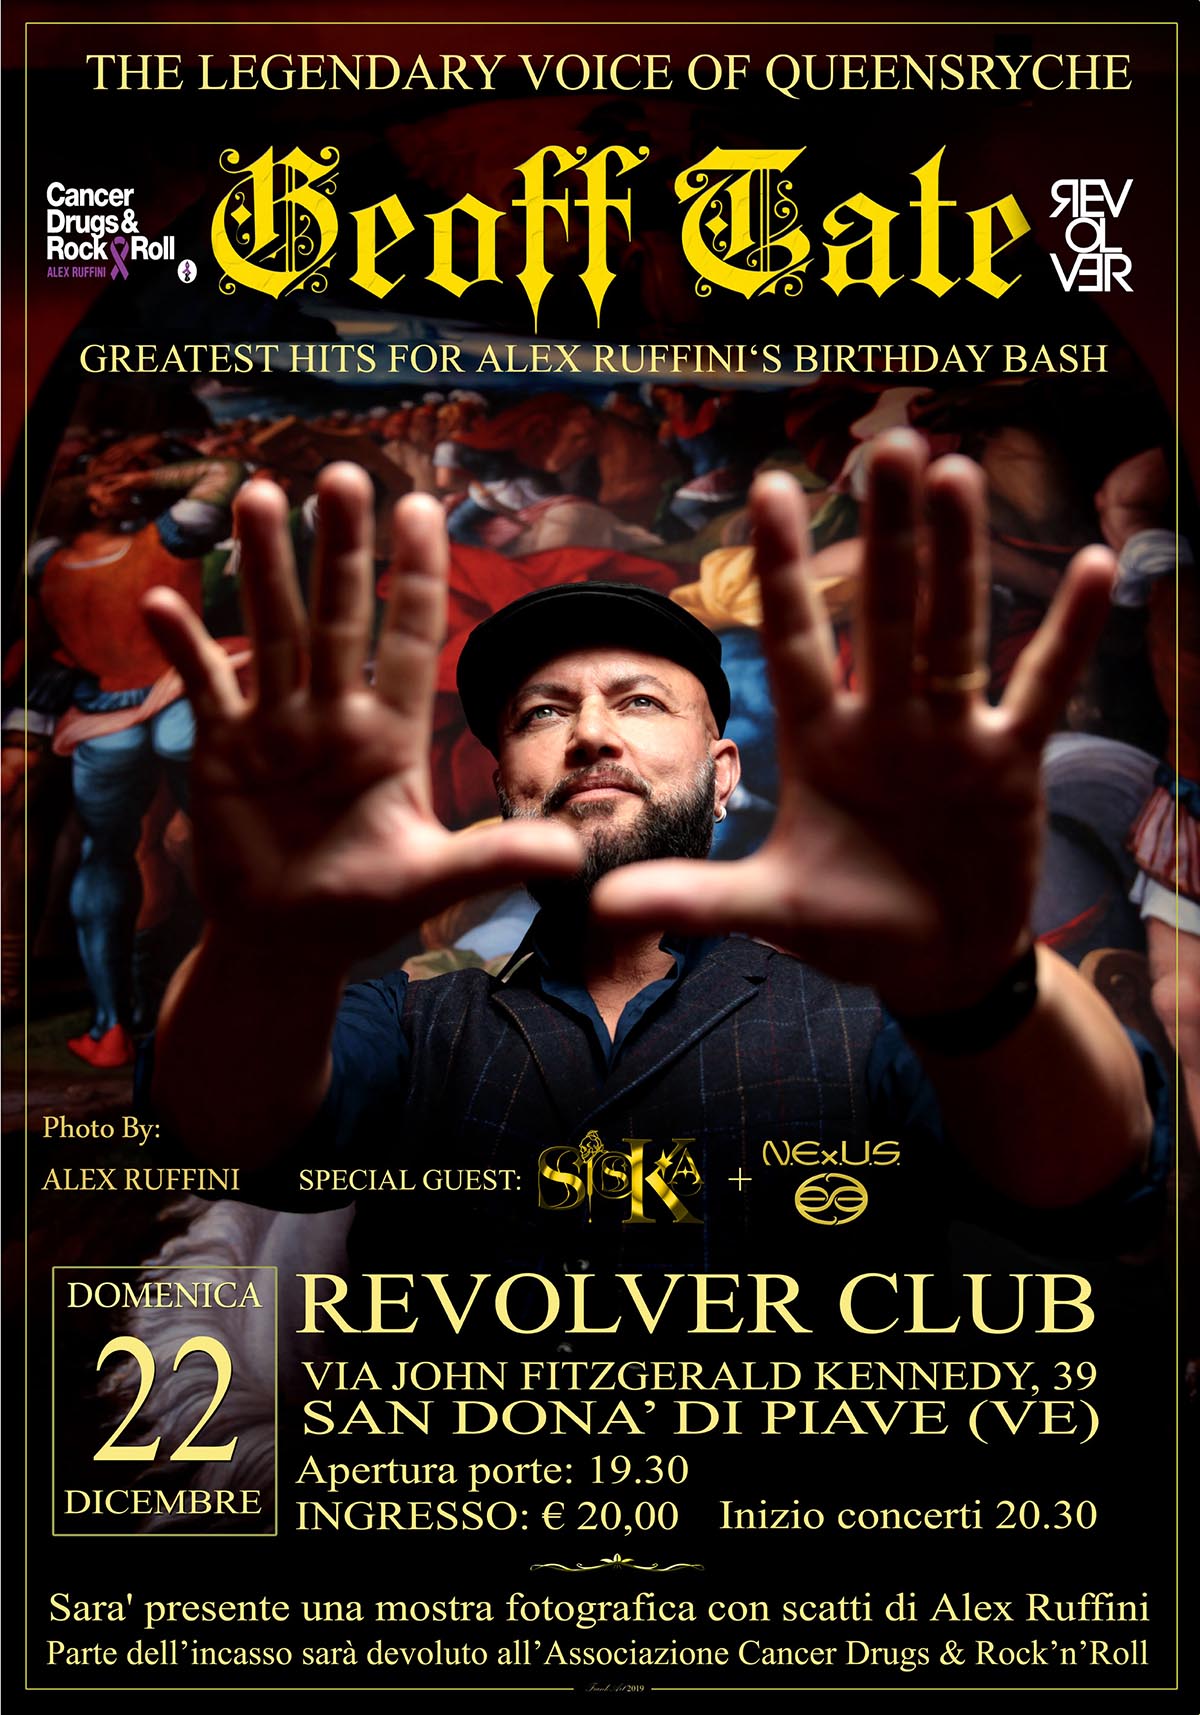 Geoff Tate's greatest Hits Show for Alex Ruffini's Birthday Bash